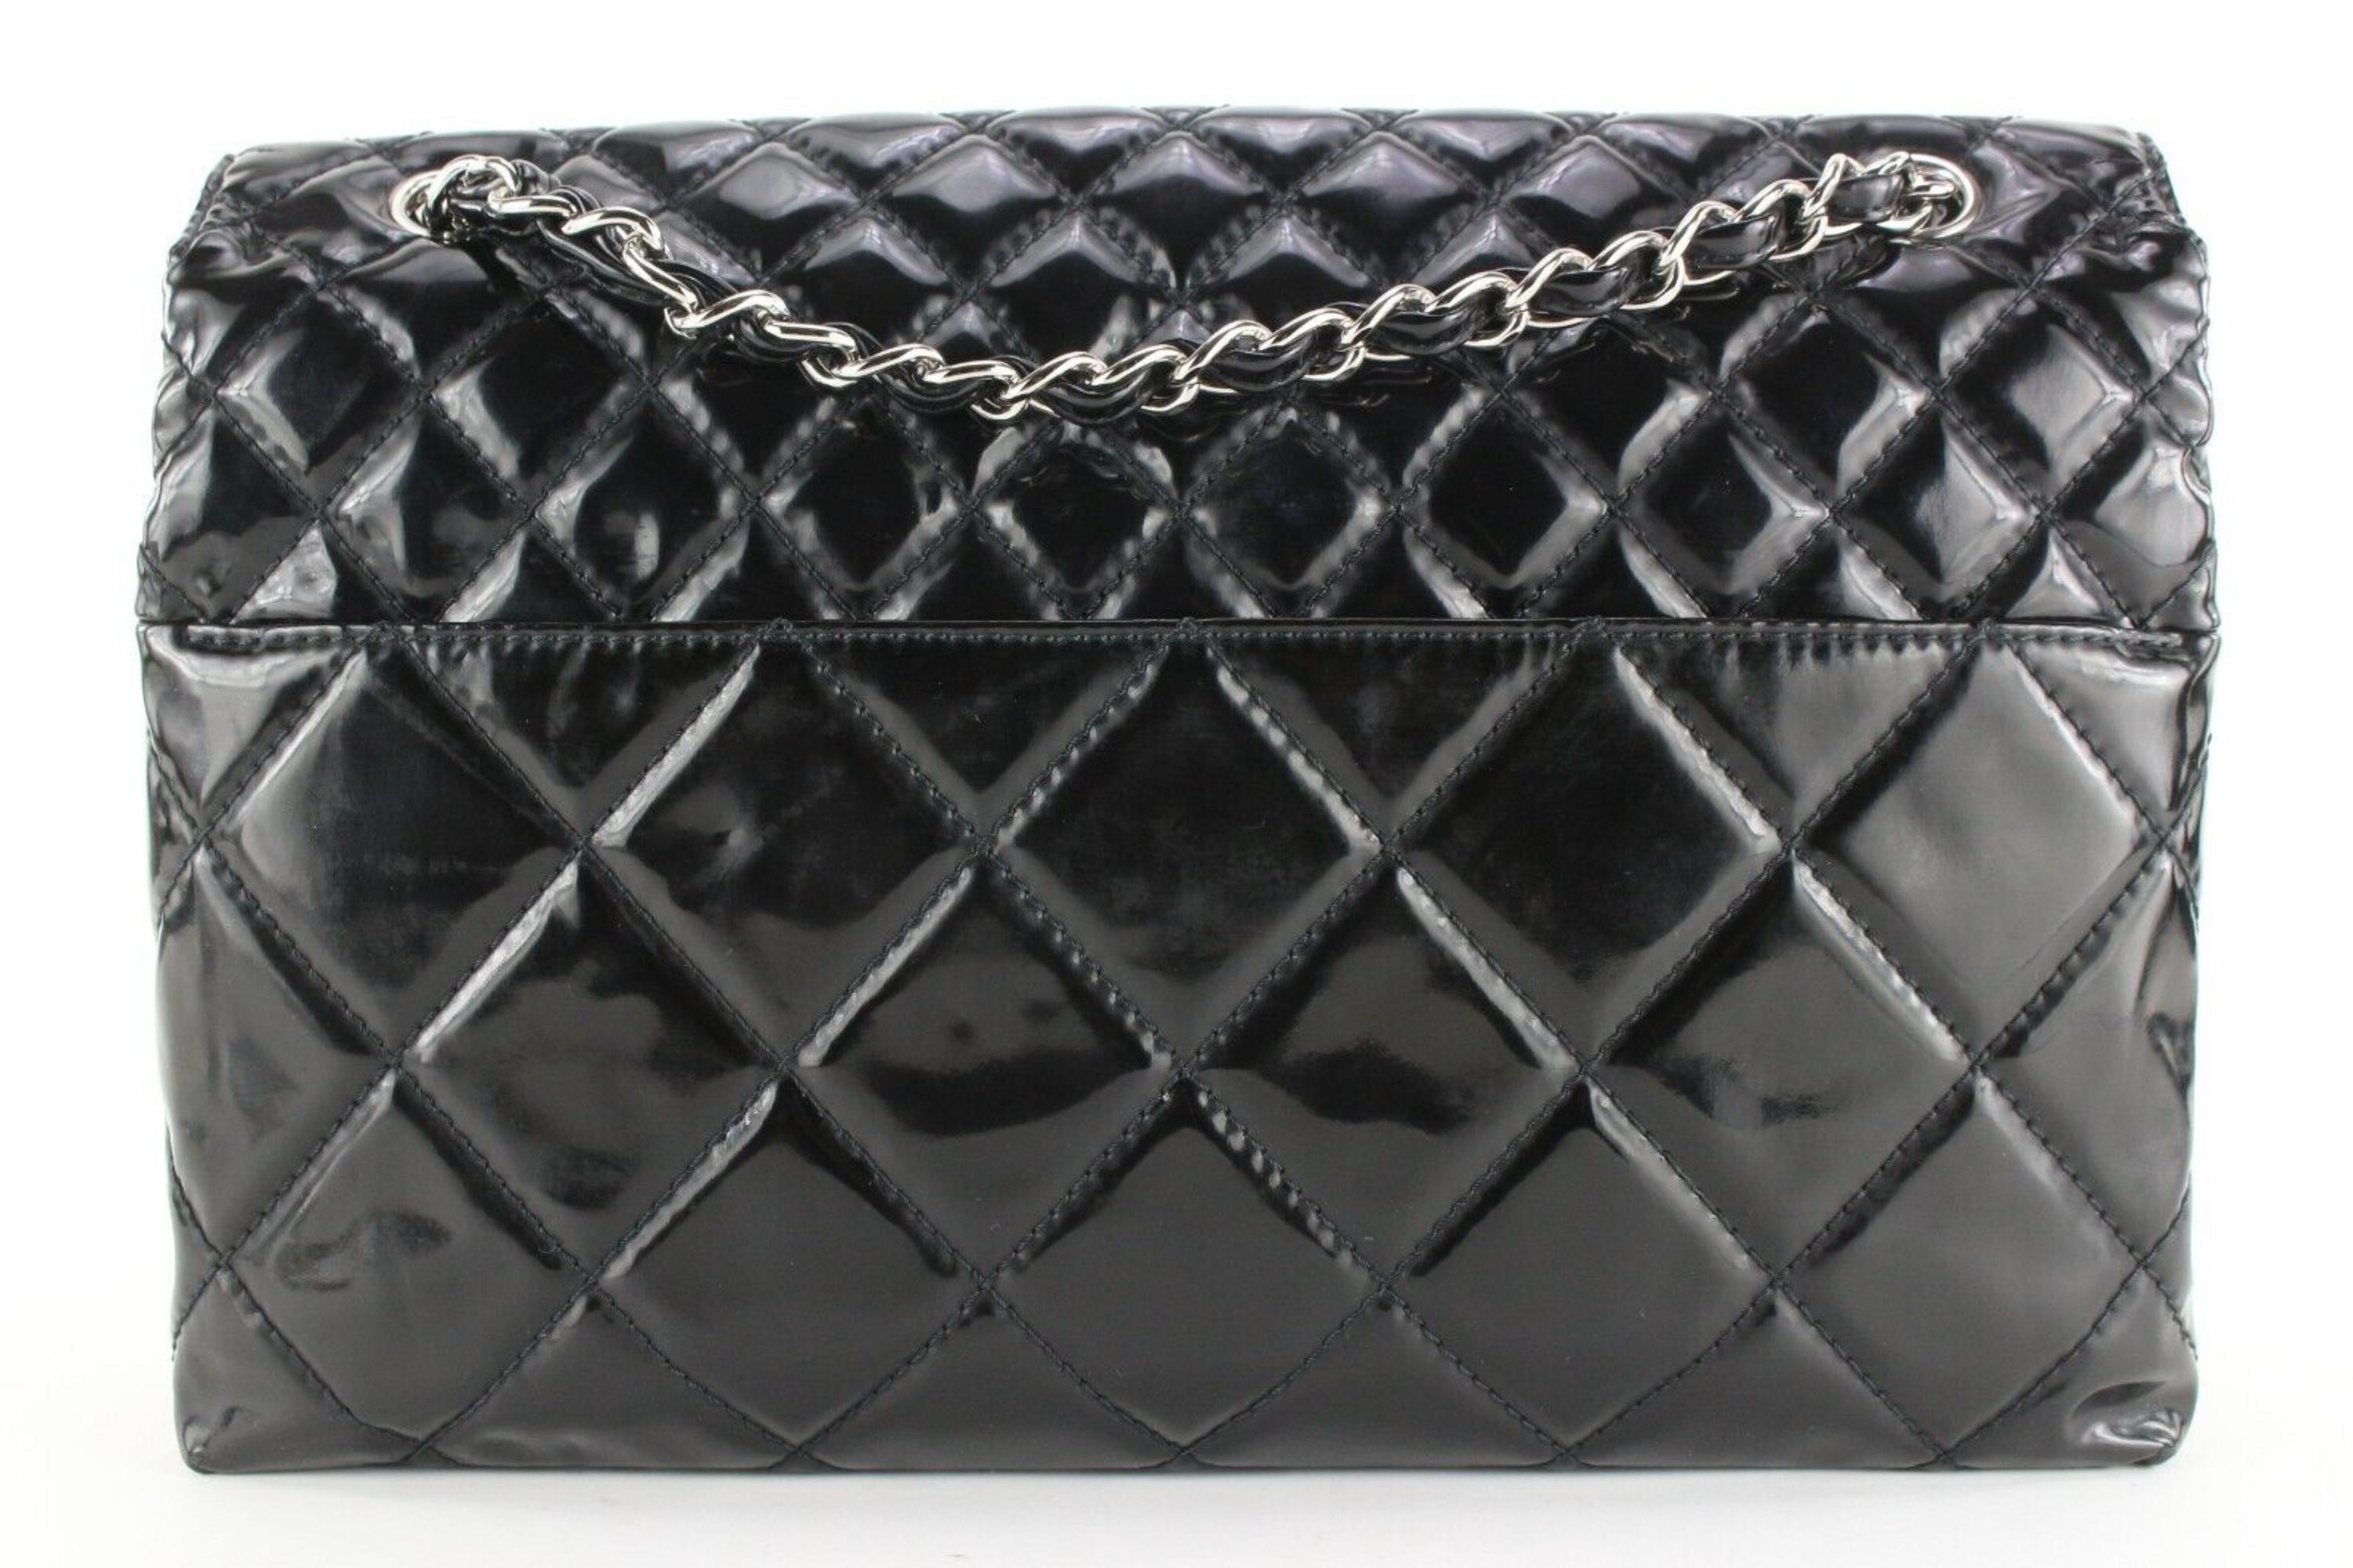 Chanel Black Quilted Patent Jumbo Flap SHW 89c26a For Sale 1